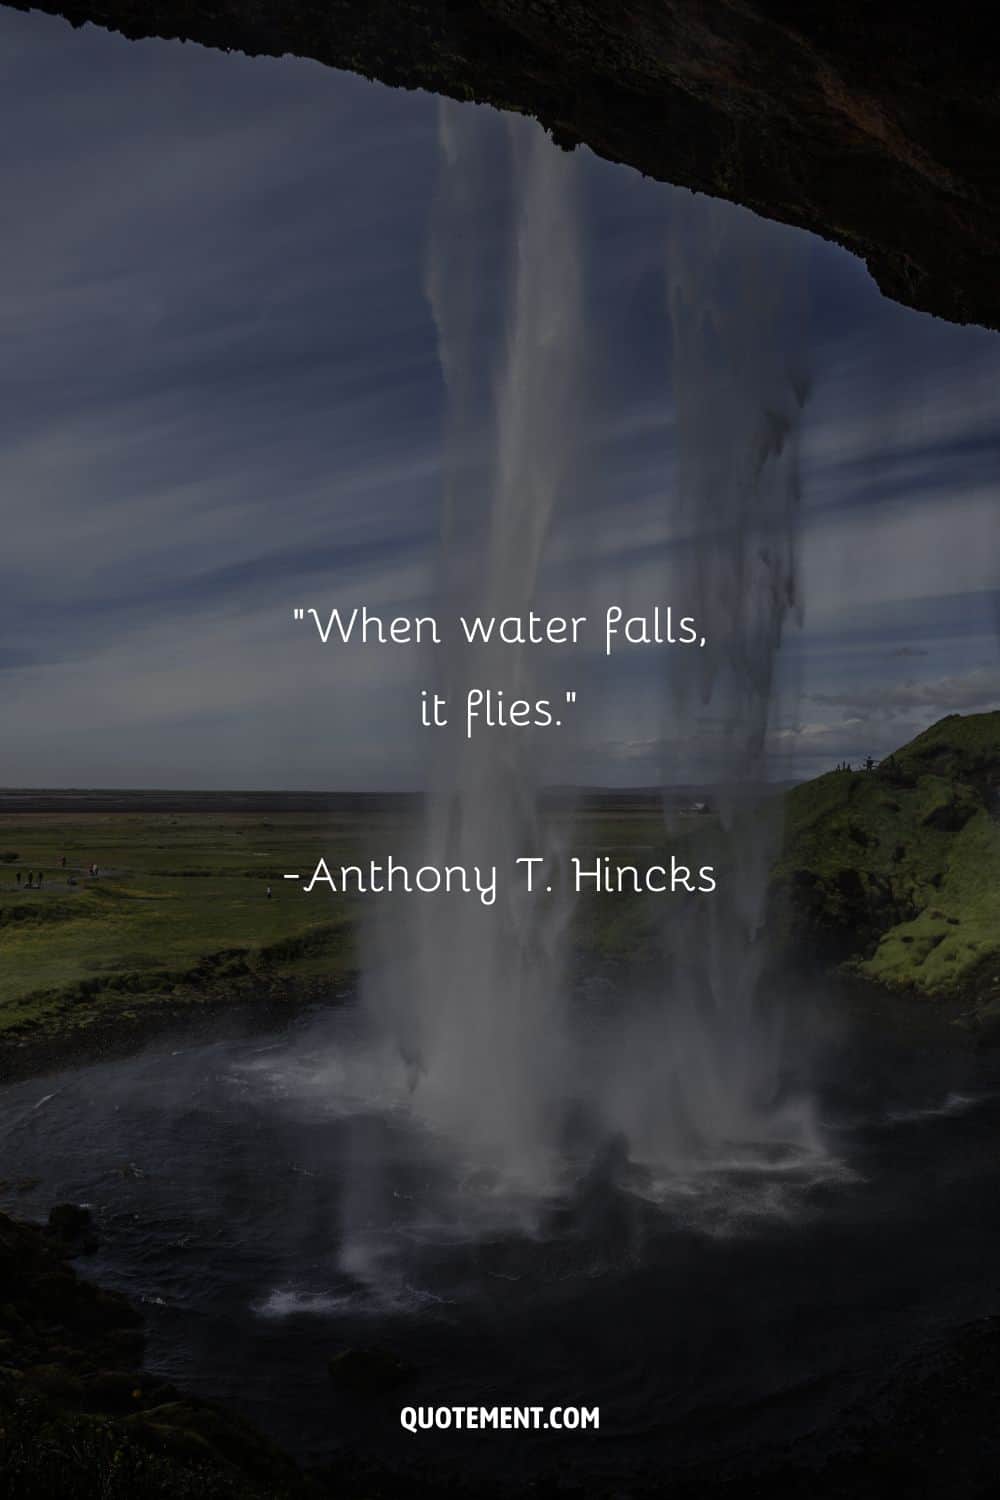 Inspirational quote on water by Anthony T. Hincks and a waterfall in the background
